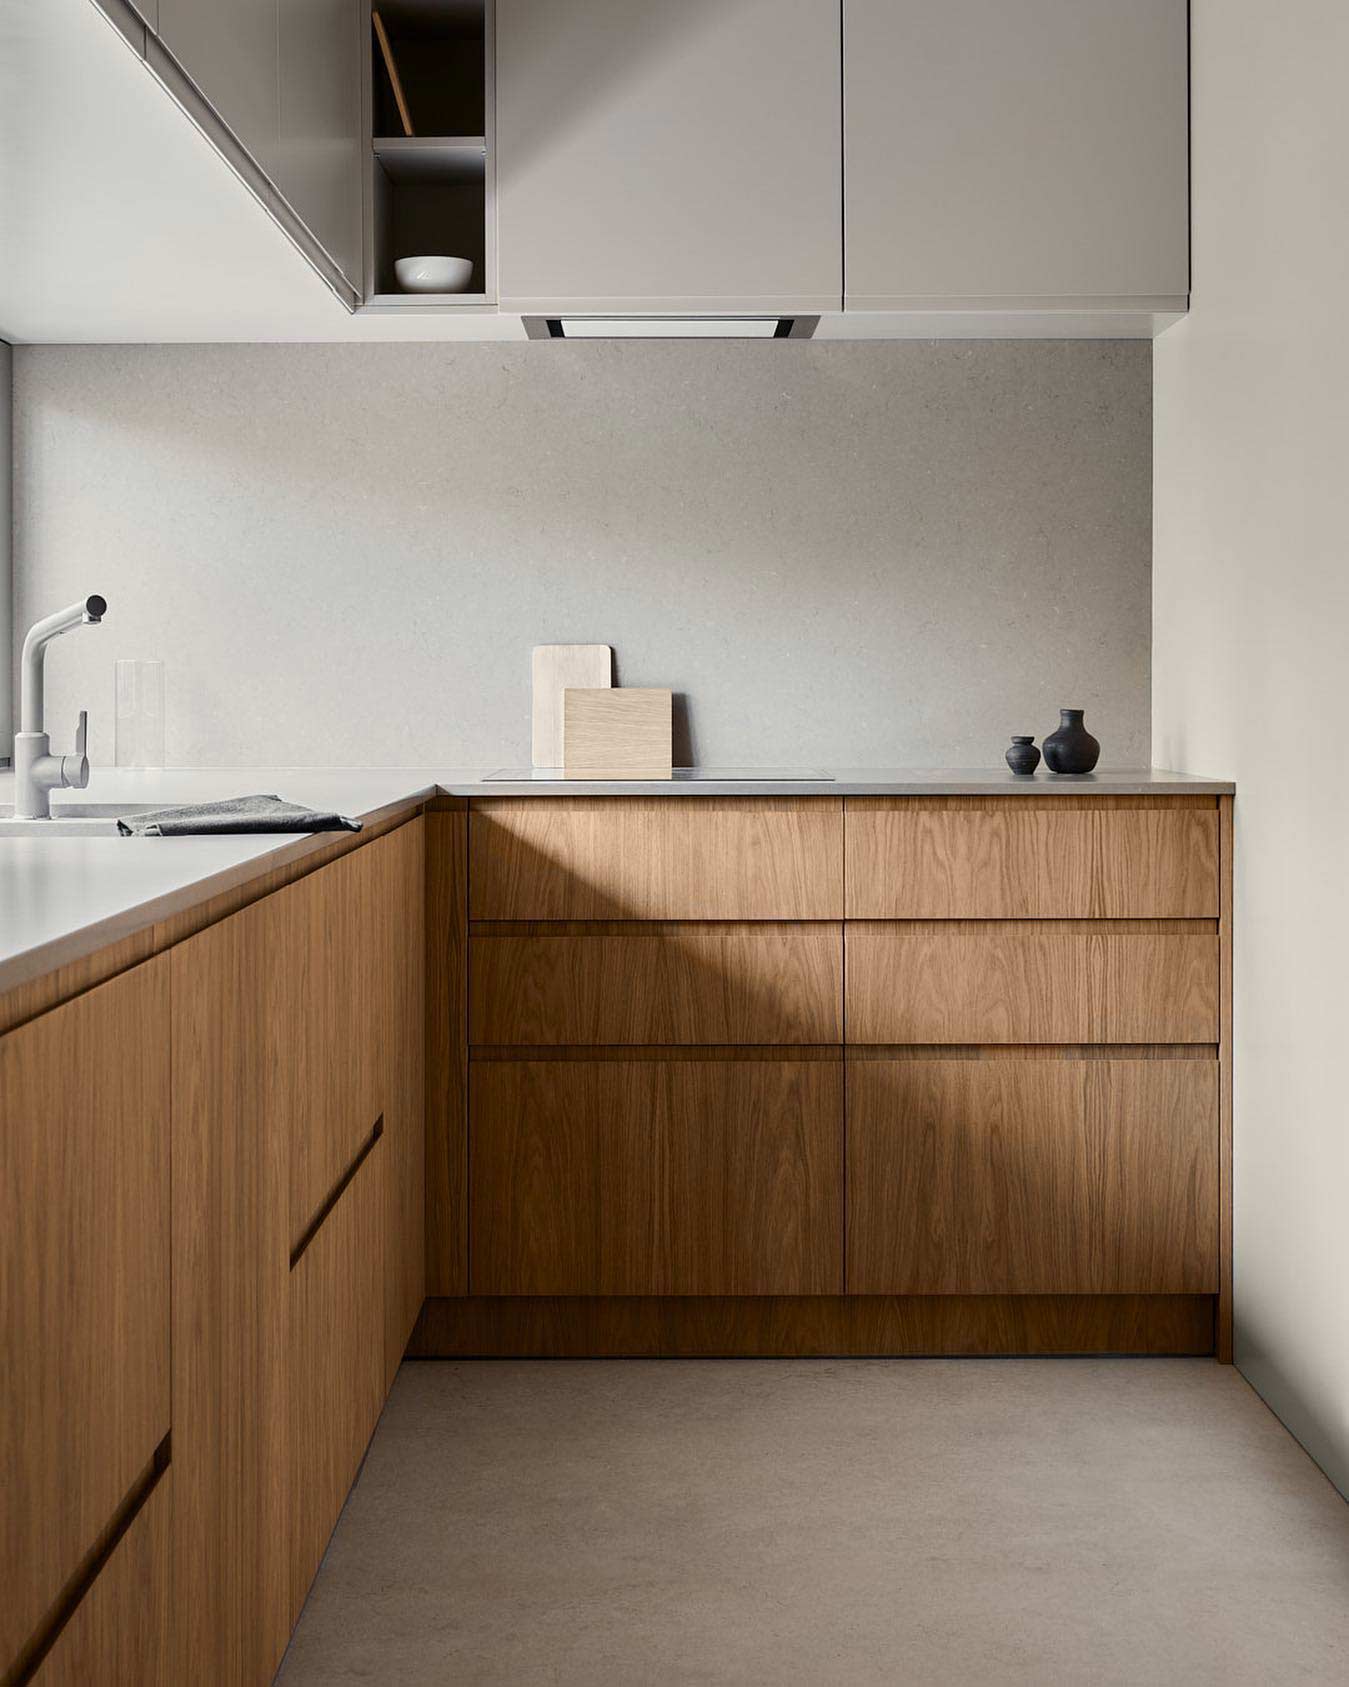 Metod system kitchen with gray and wooden cabinets in natural and discreet colors